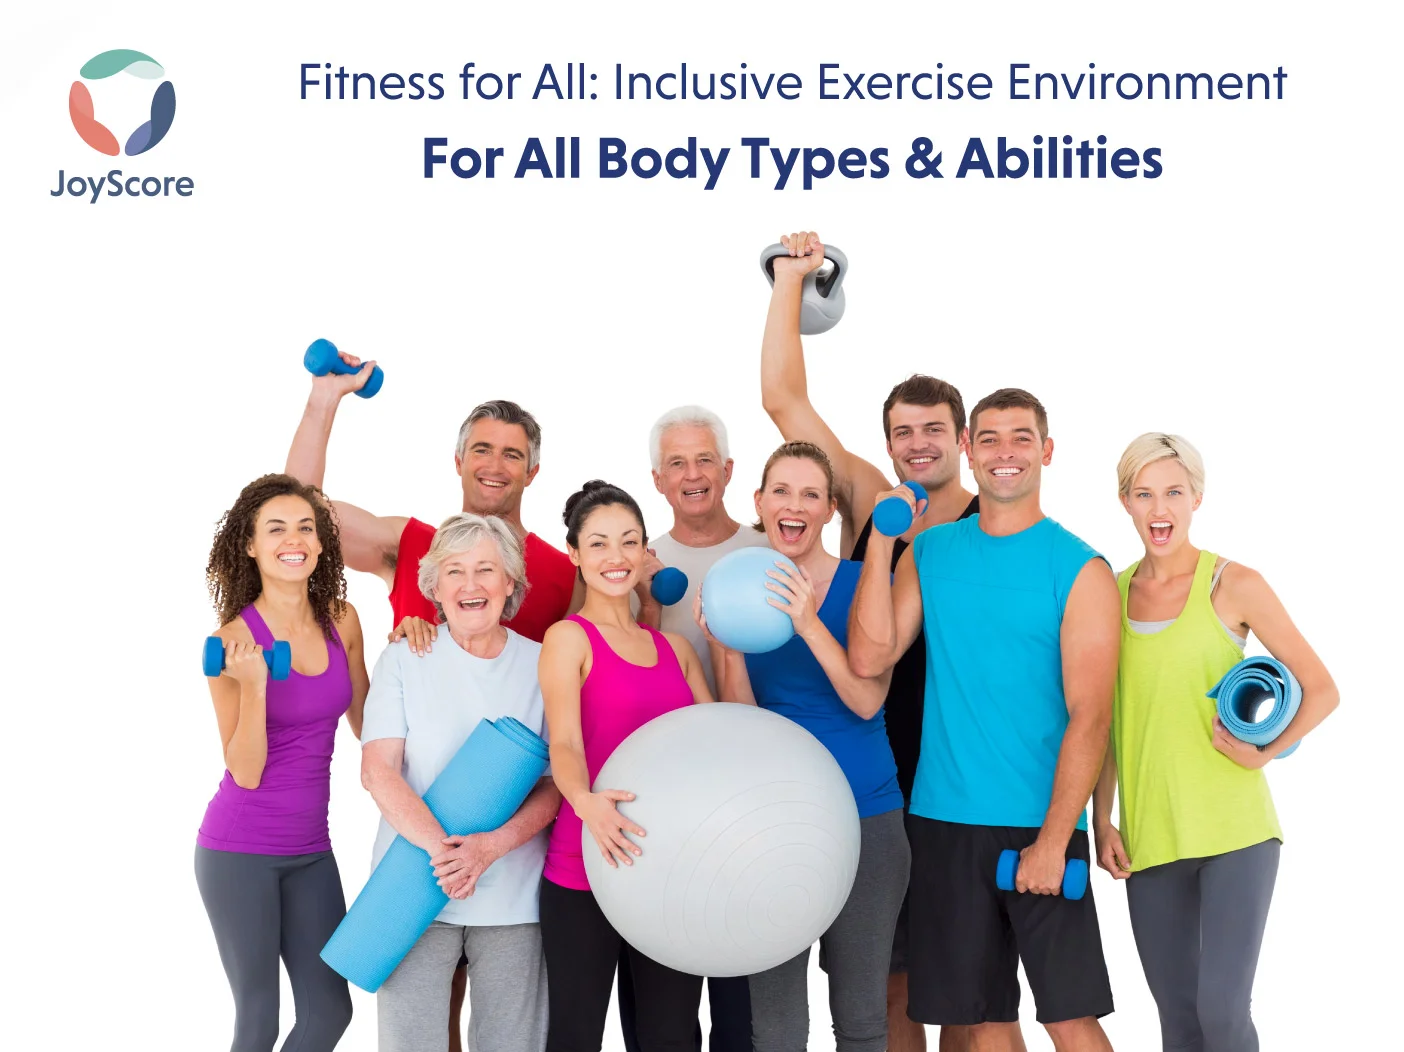 Positive Exercise in an Inclusive Workout Space